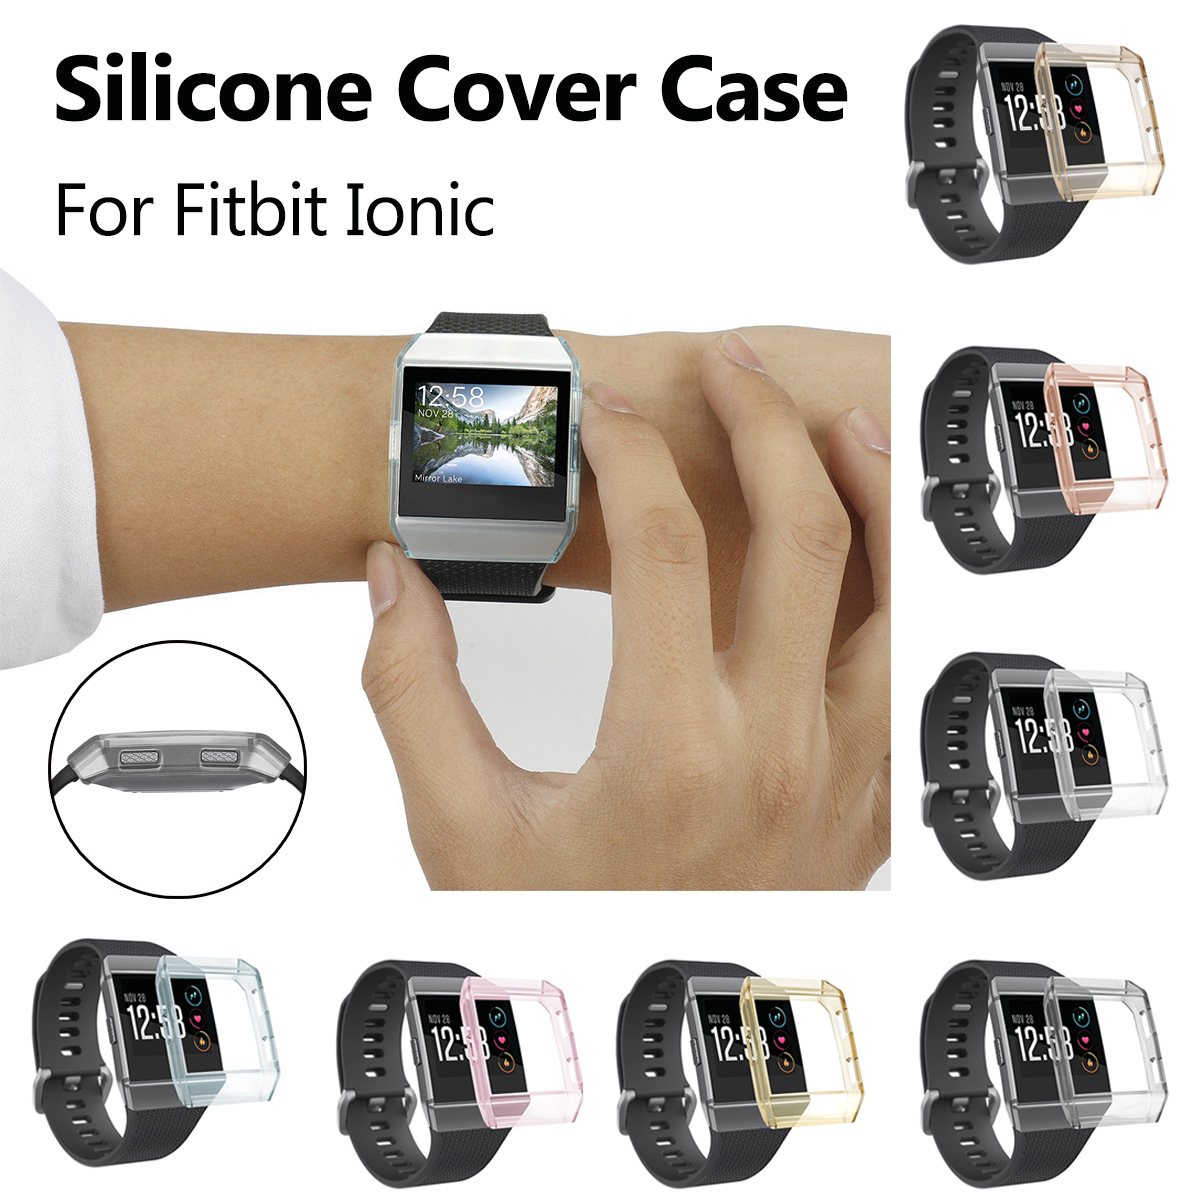 Silicone--Case-Cover-Protective-Shell-for-Fitbit-Ionic-Smart-Band-1252040